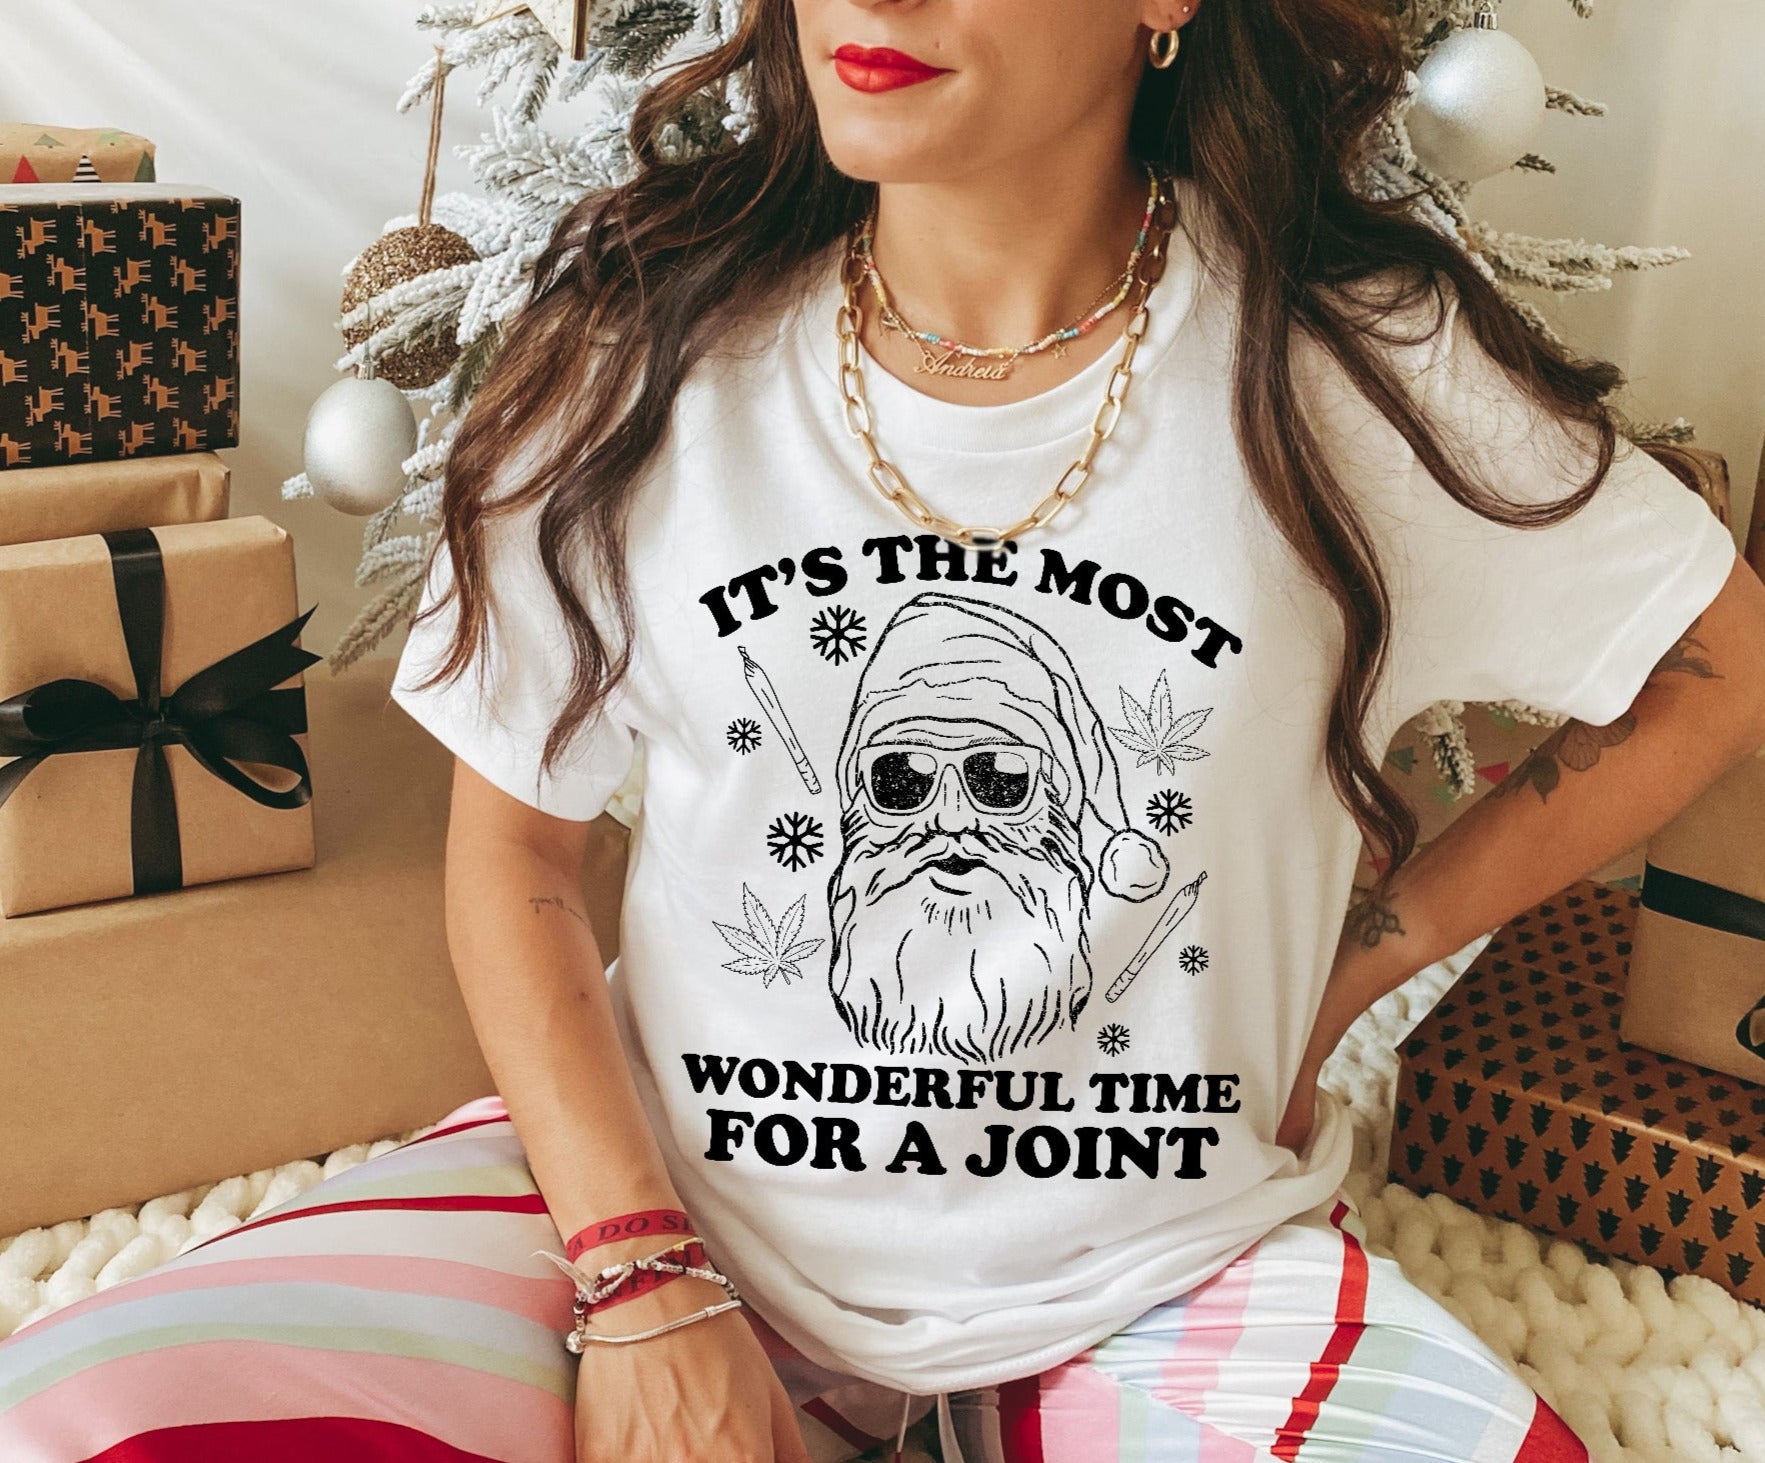 weed christmas shirt that says It's the most wonderful time for a joint - HighCiti